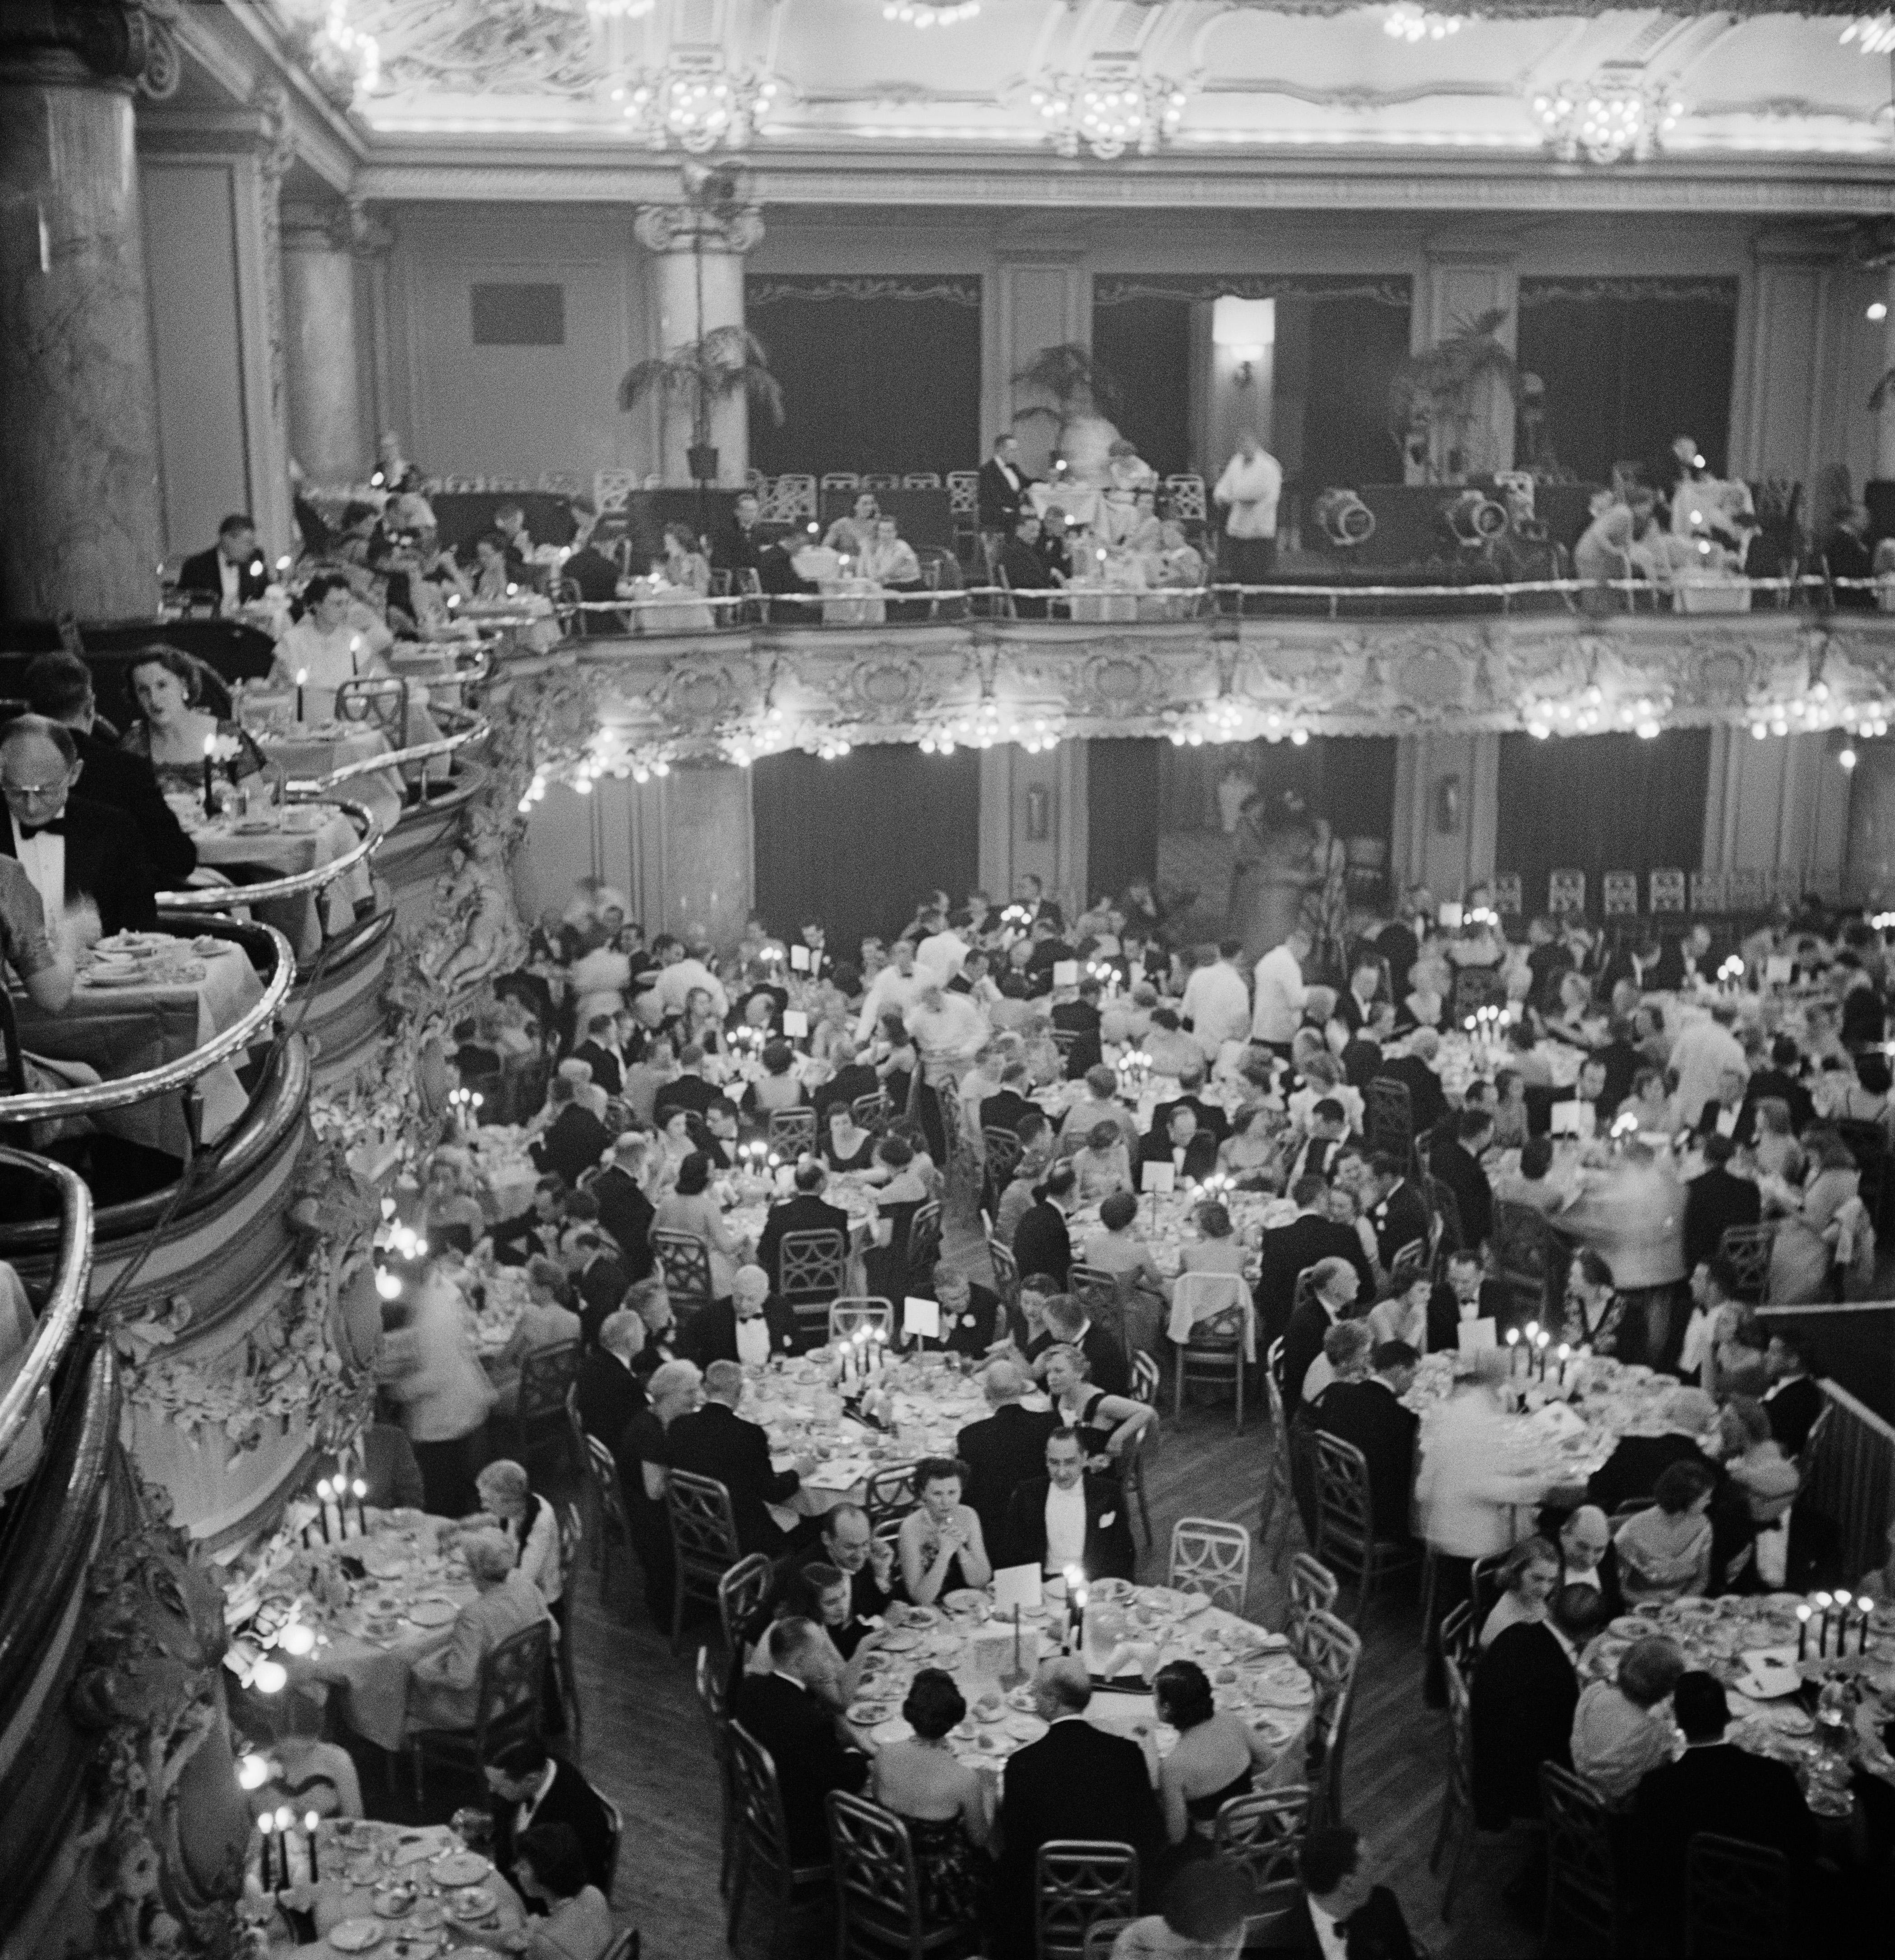 'Luxury Dining' 1955 Slim Aarons Limited Estate Edition
Diners in a grand ballroom during a fashion show, circa 1955. 

Slim Aarons silver gelatine fibre based print 
Printed Later 
Slim Aarons Estate Edition 
Produced utilising the only original